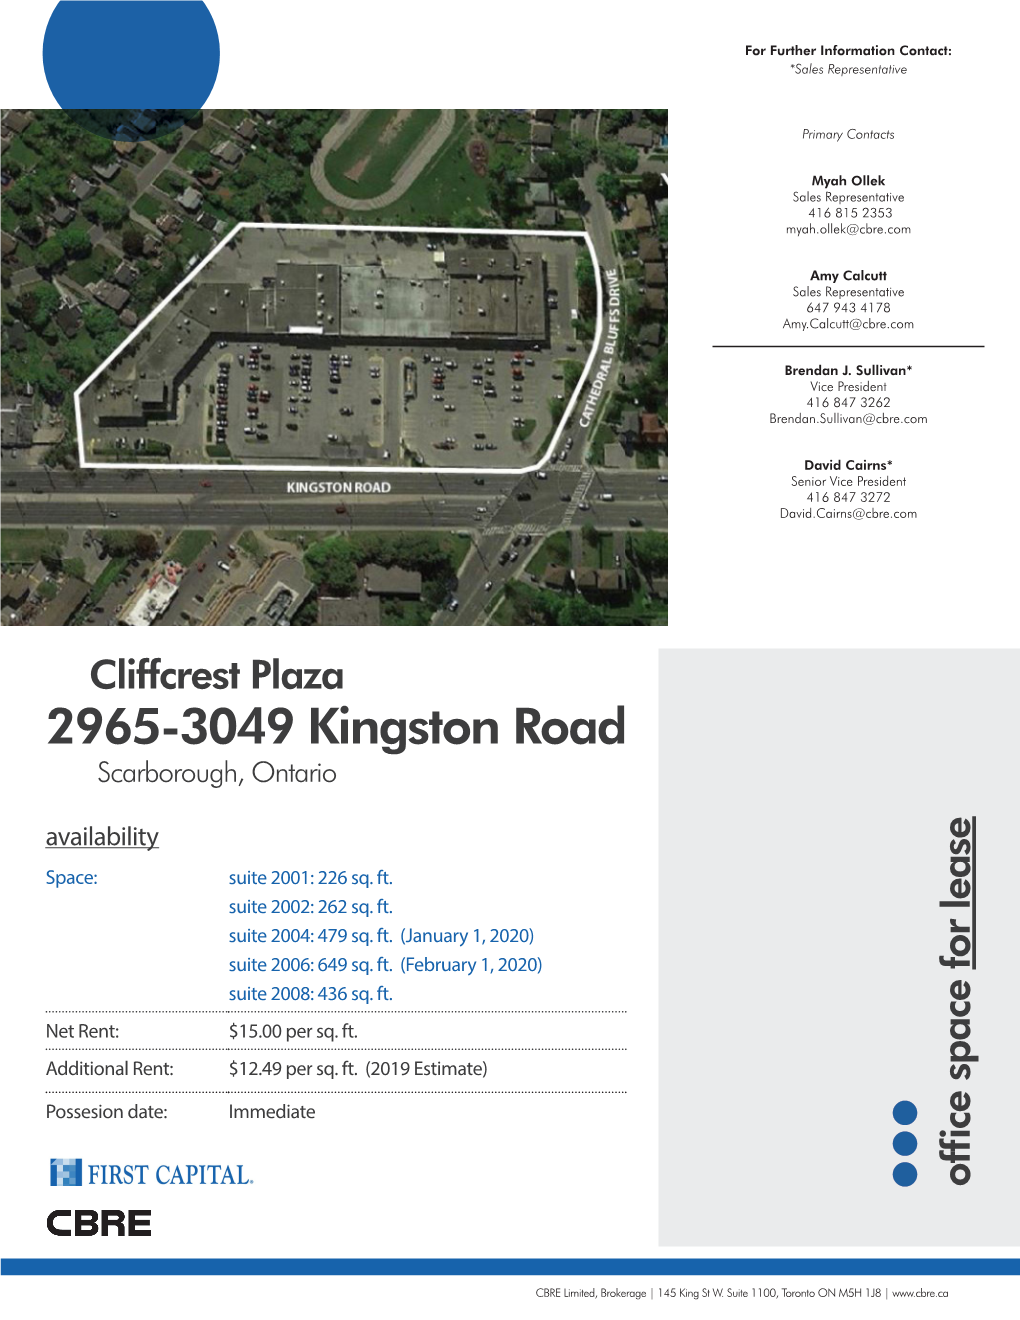 2965-3049 Kingston Road Scarborough, Ontario Availability Space: Suite 2001: 226 Sq